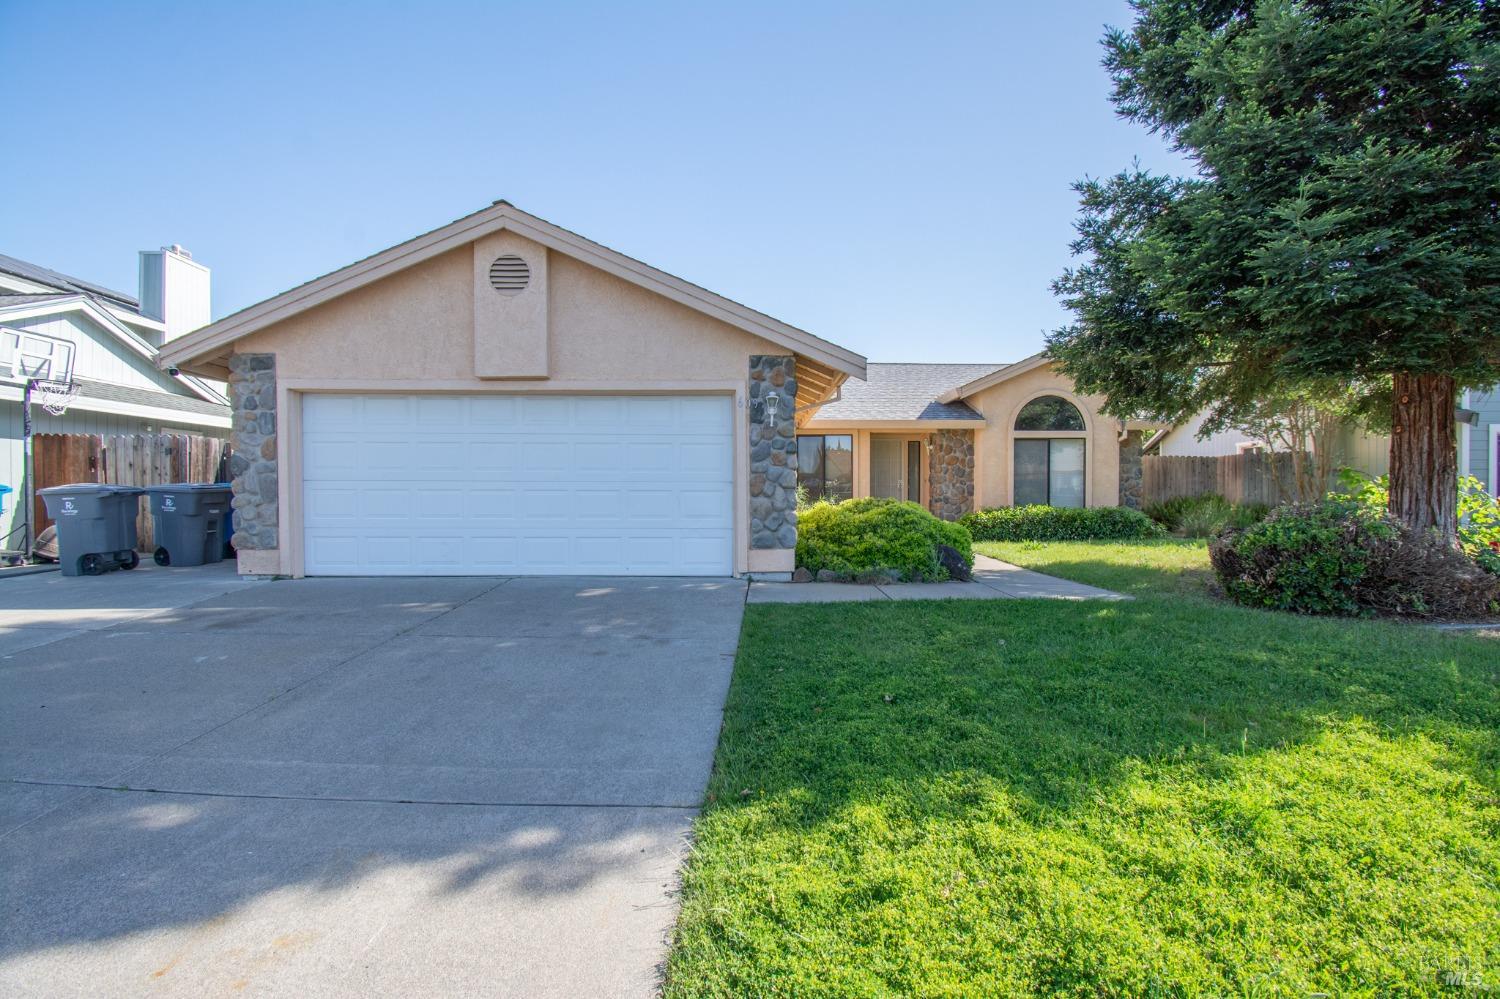 Welcome to this charming and well maintained family home located in the heart of Vacaville. This sin